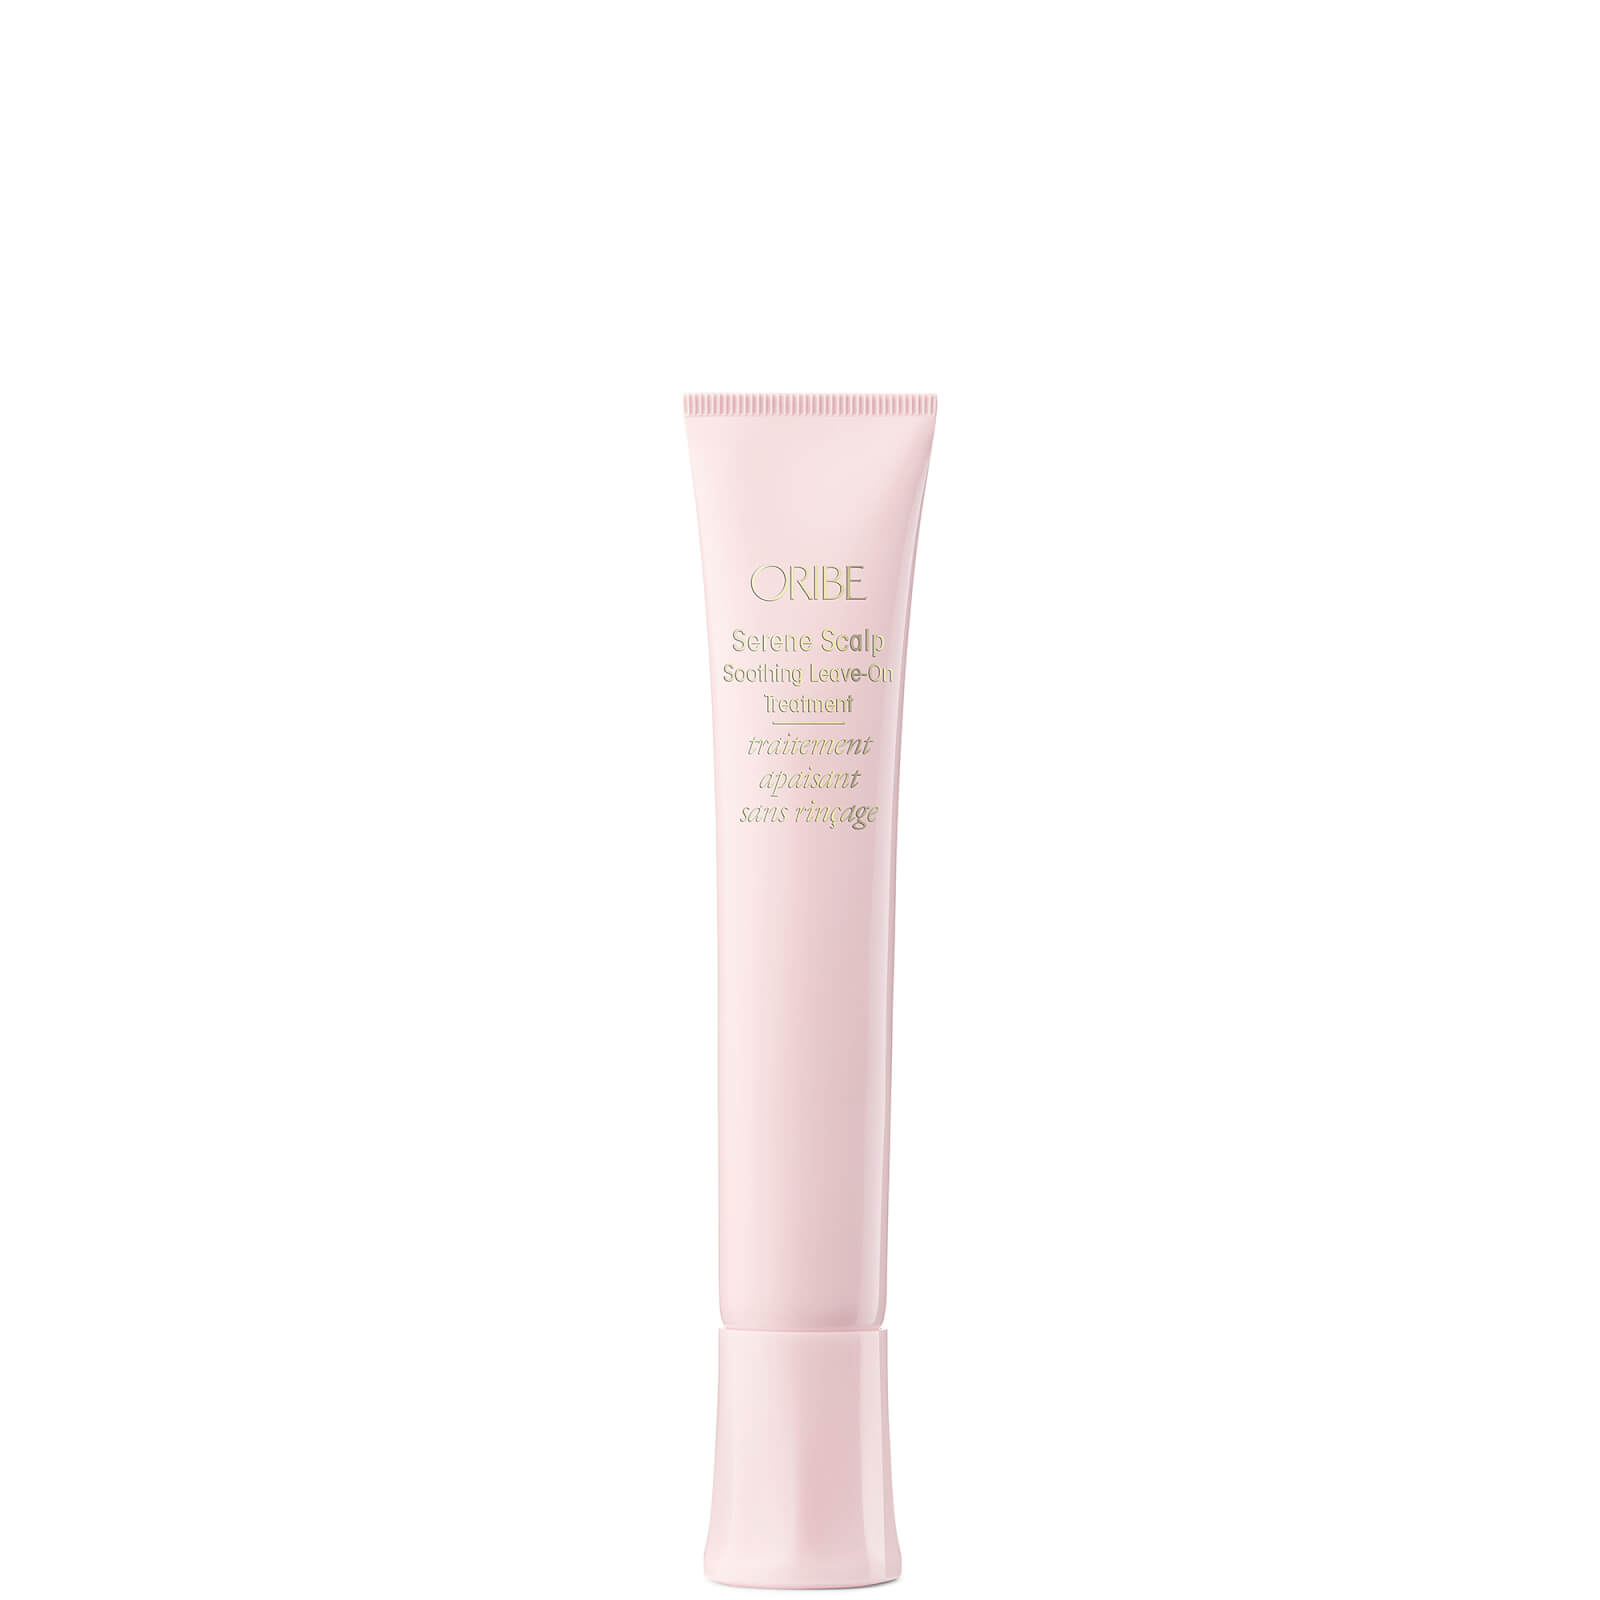 Oribe Serene Scalp Soothing Leave-in Treatment 1.7 oz In Pink